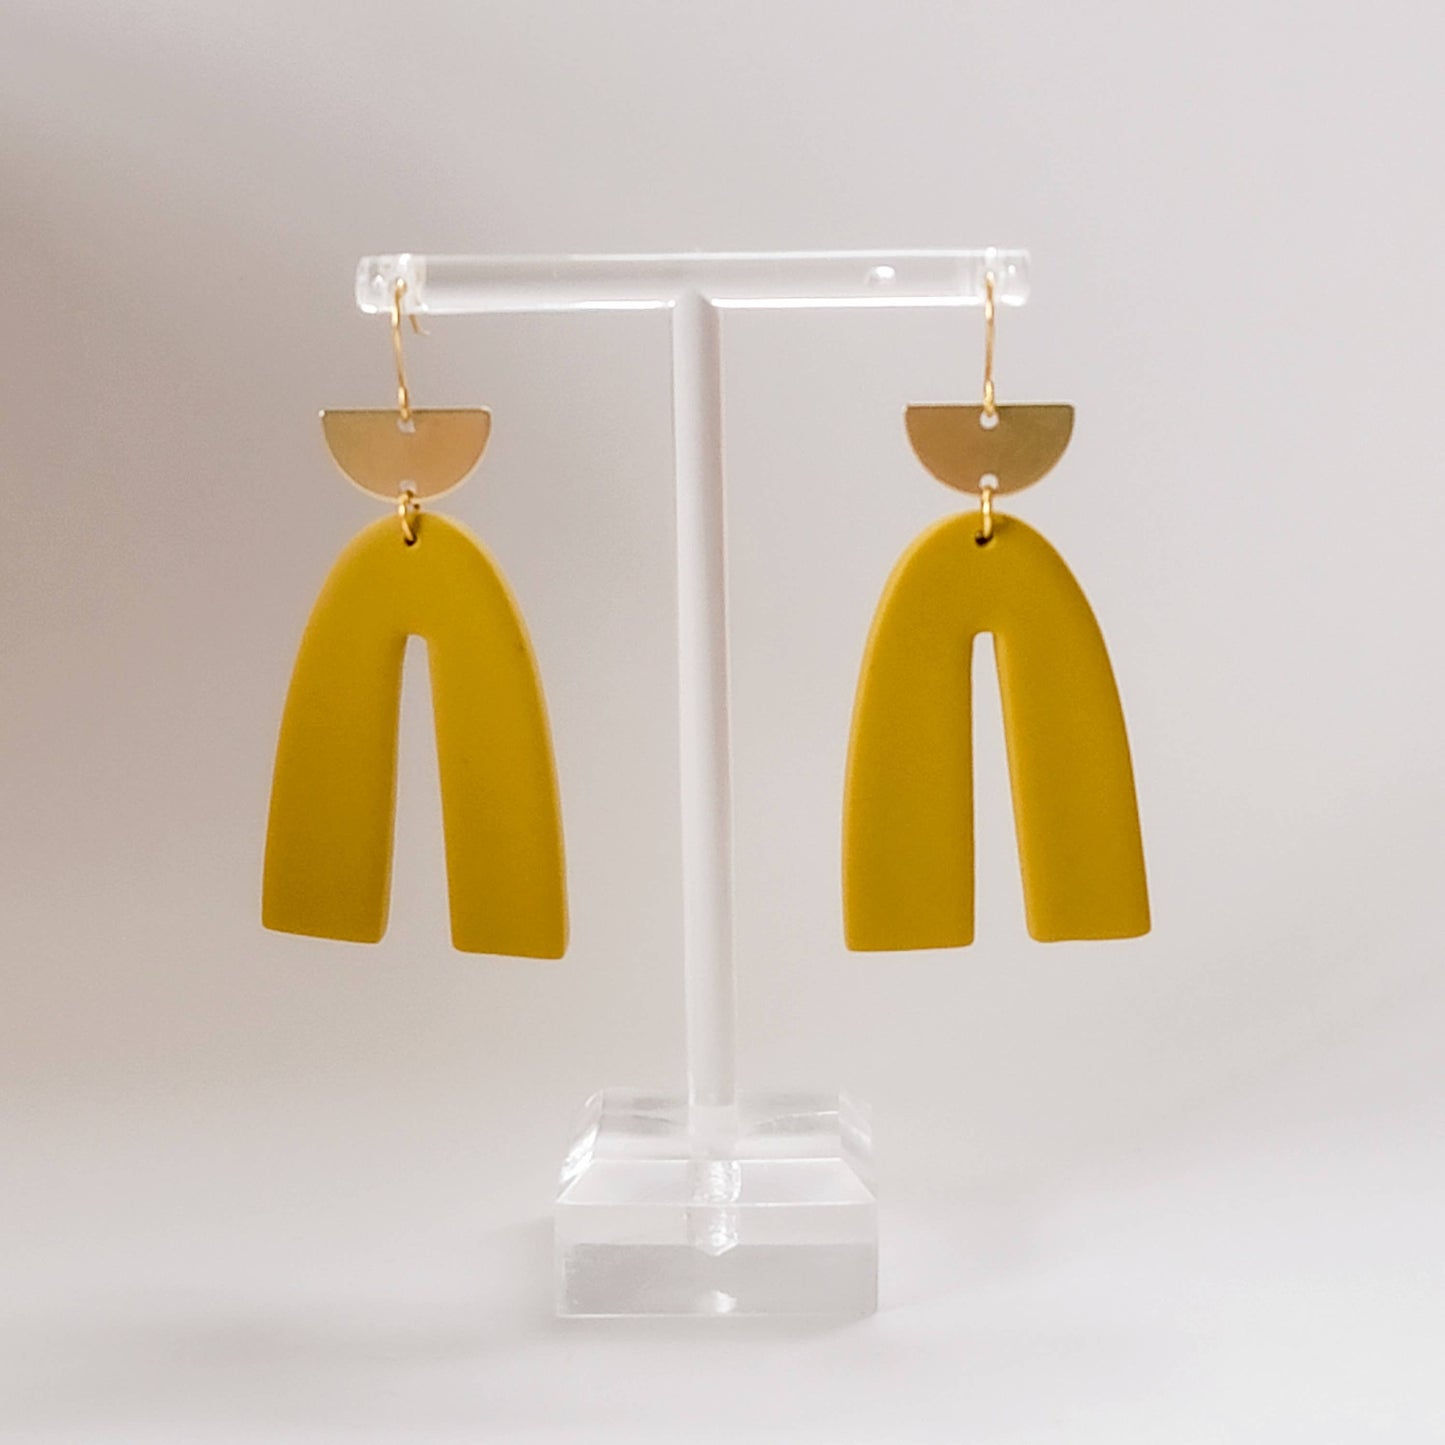 Abstract Polymer Clay Arch Earrings in Mustard Yellow